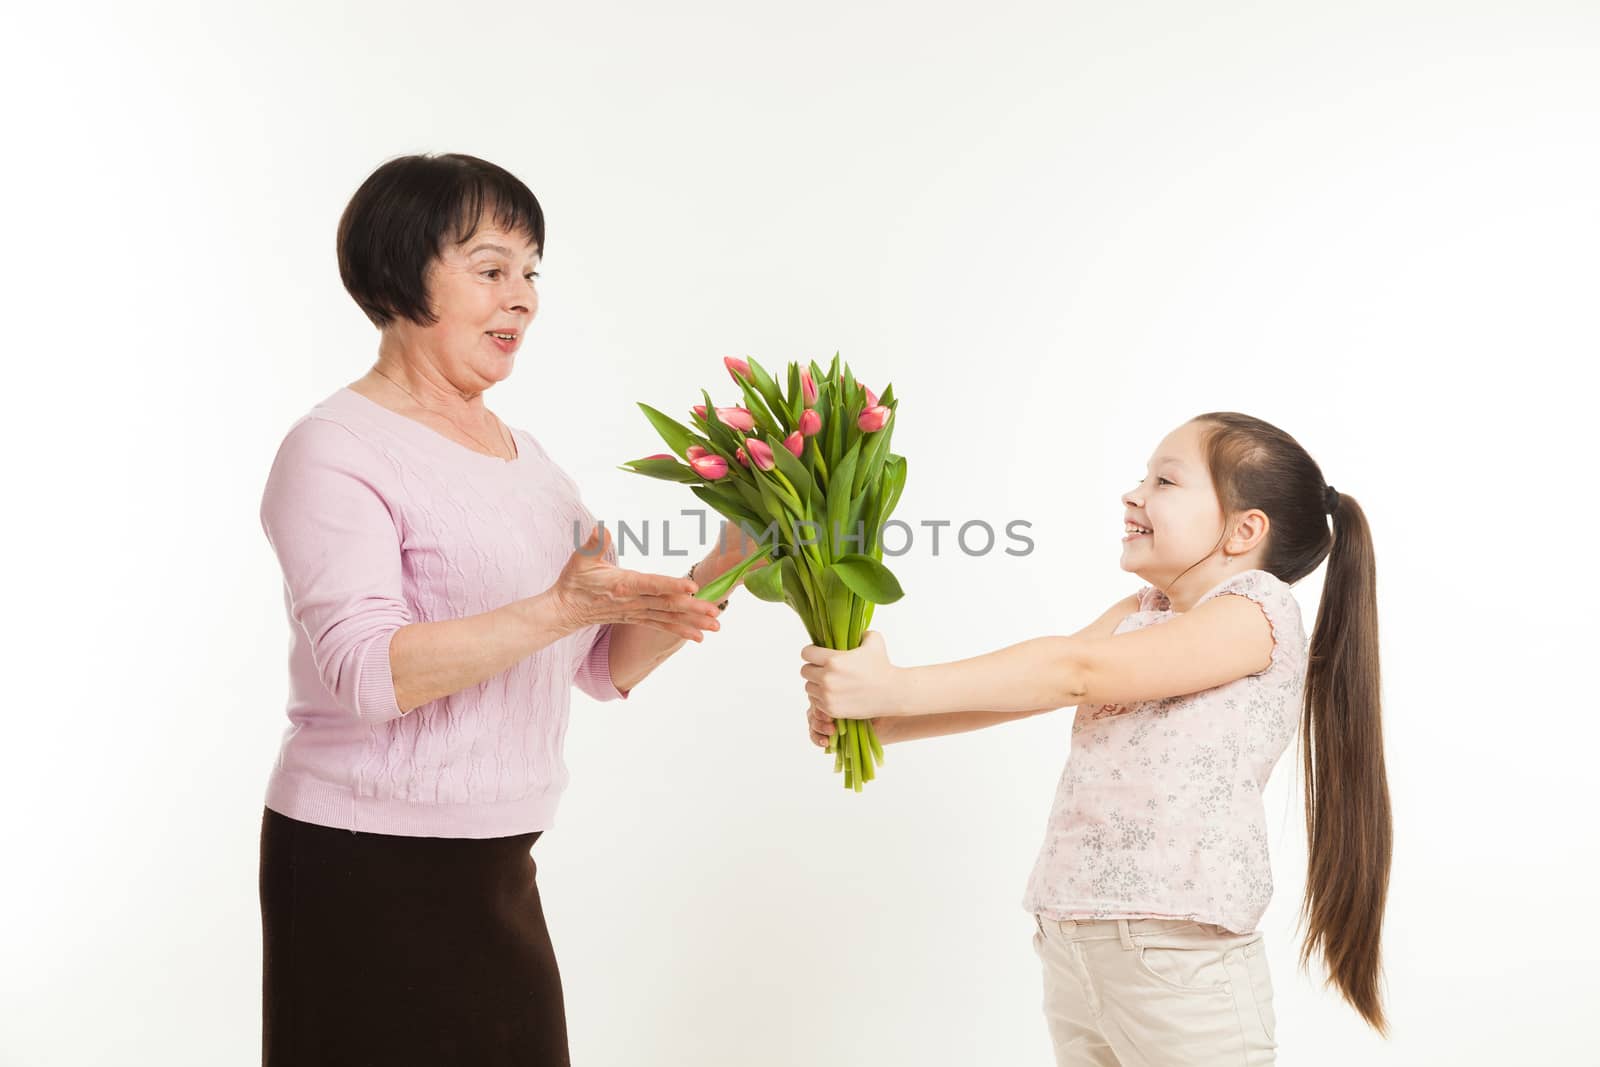 the granddaughter congratulates the grandmother and gives it flowers